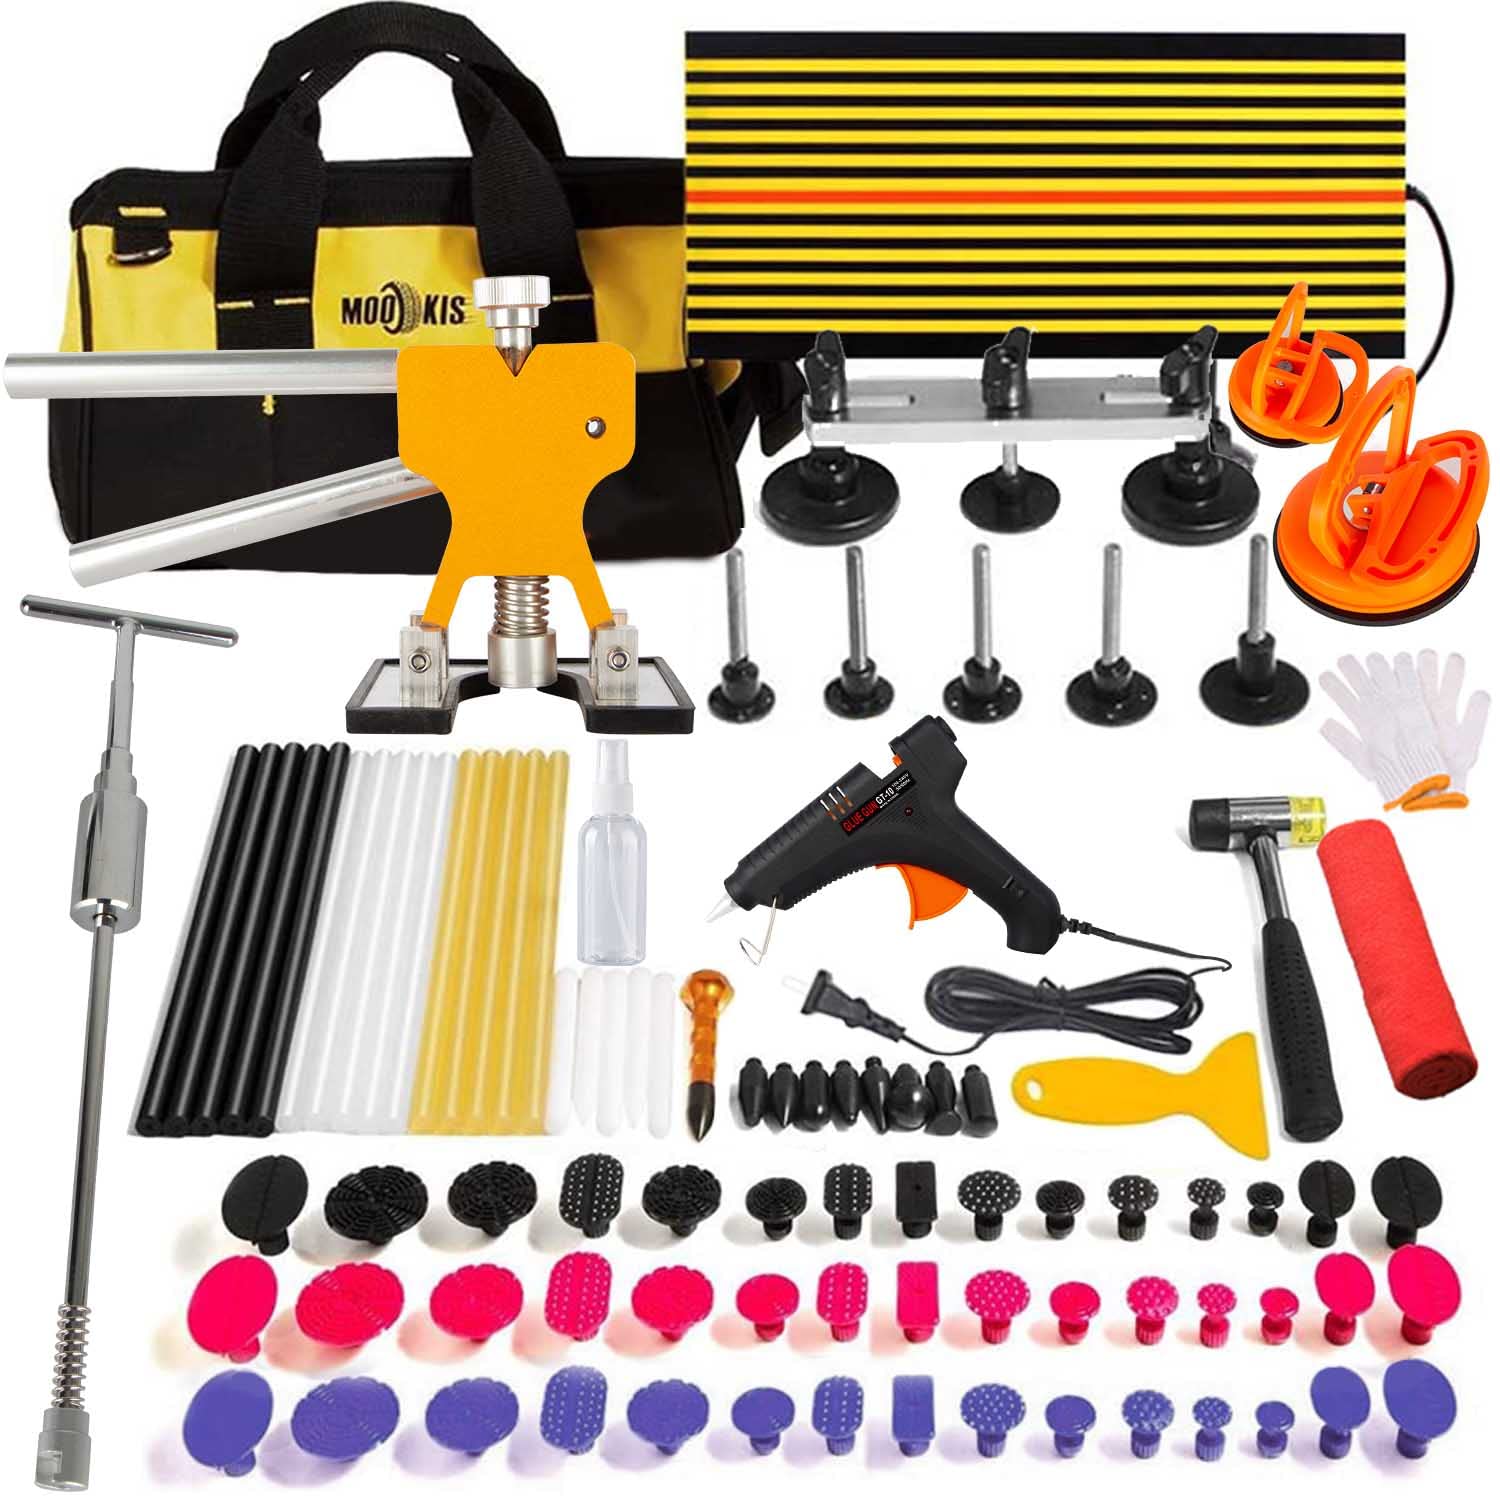 Mookis Paintless Dent Repair Kit 92PCS Dent Puller Kit with Golden Dent Lifter, Slider Hammer, Bridge Puller and Suction Cup for